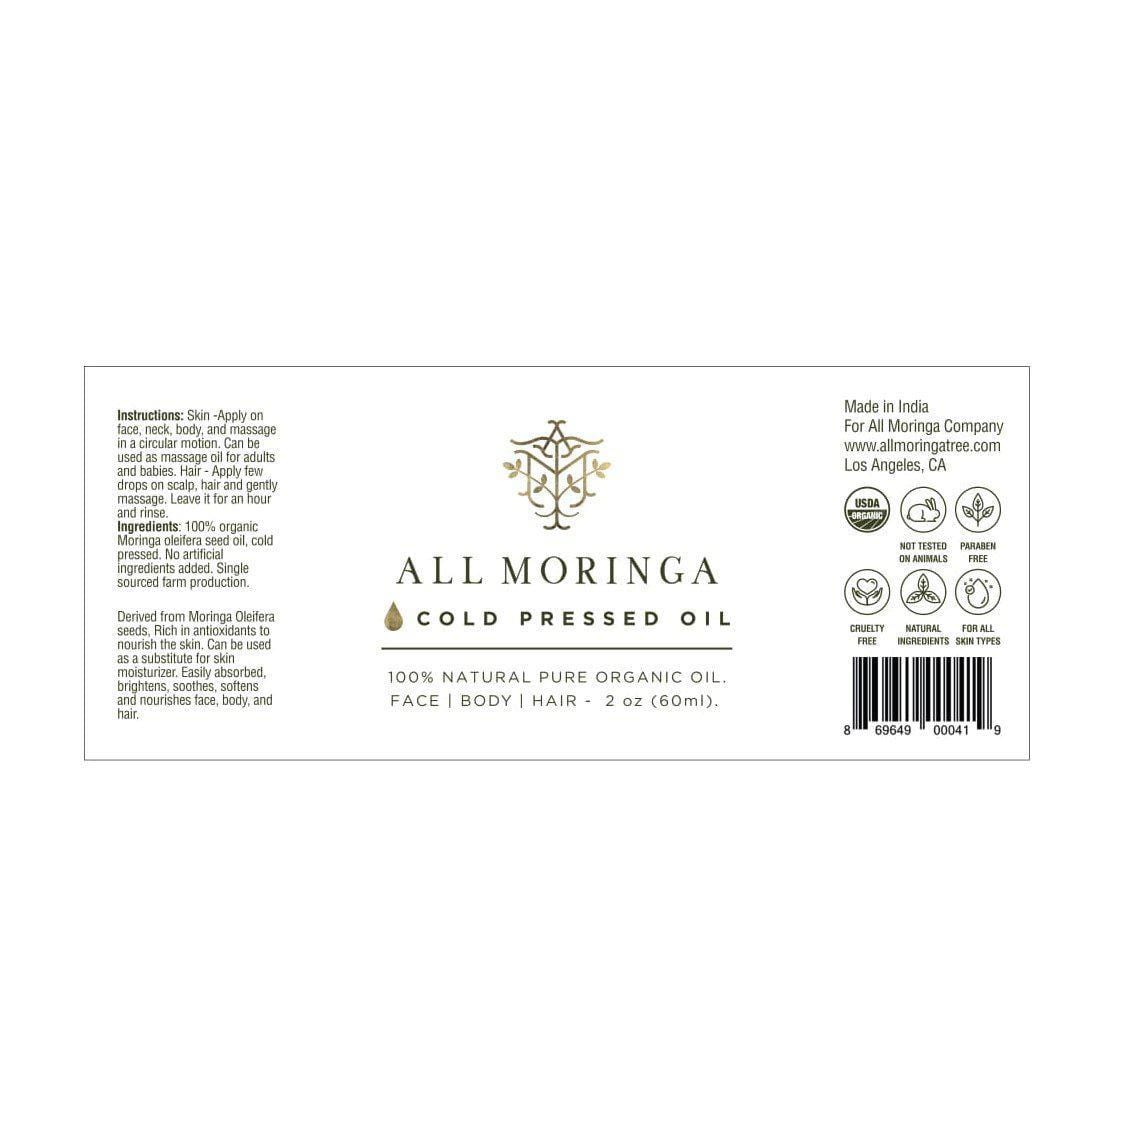 all moringa cold press moringa seed oil product label for face body hair